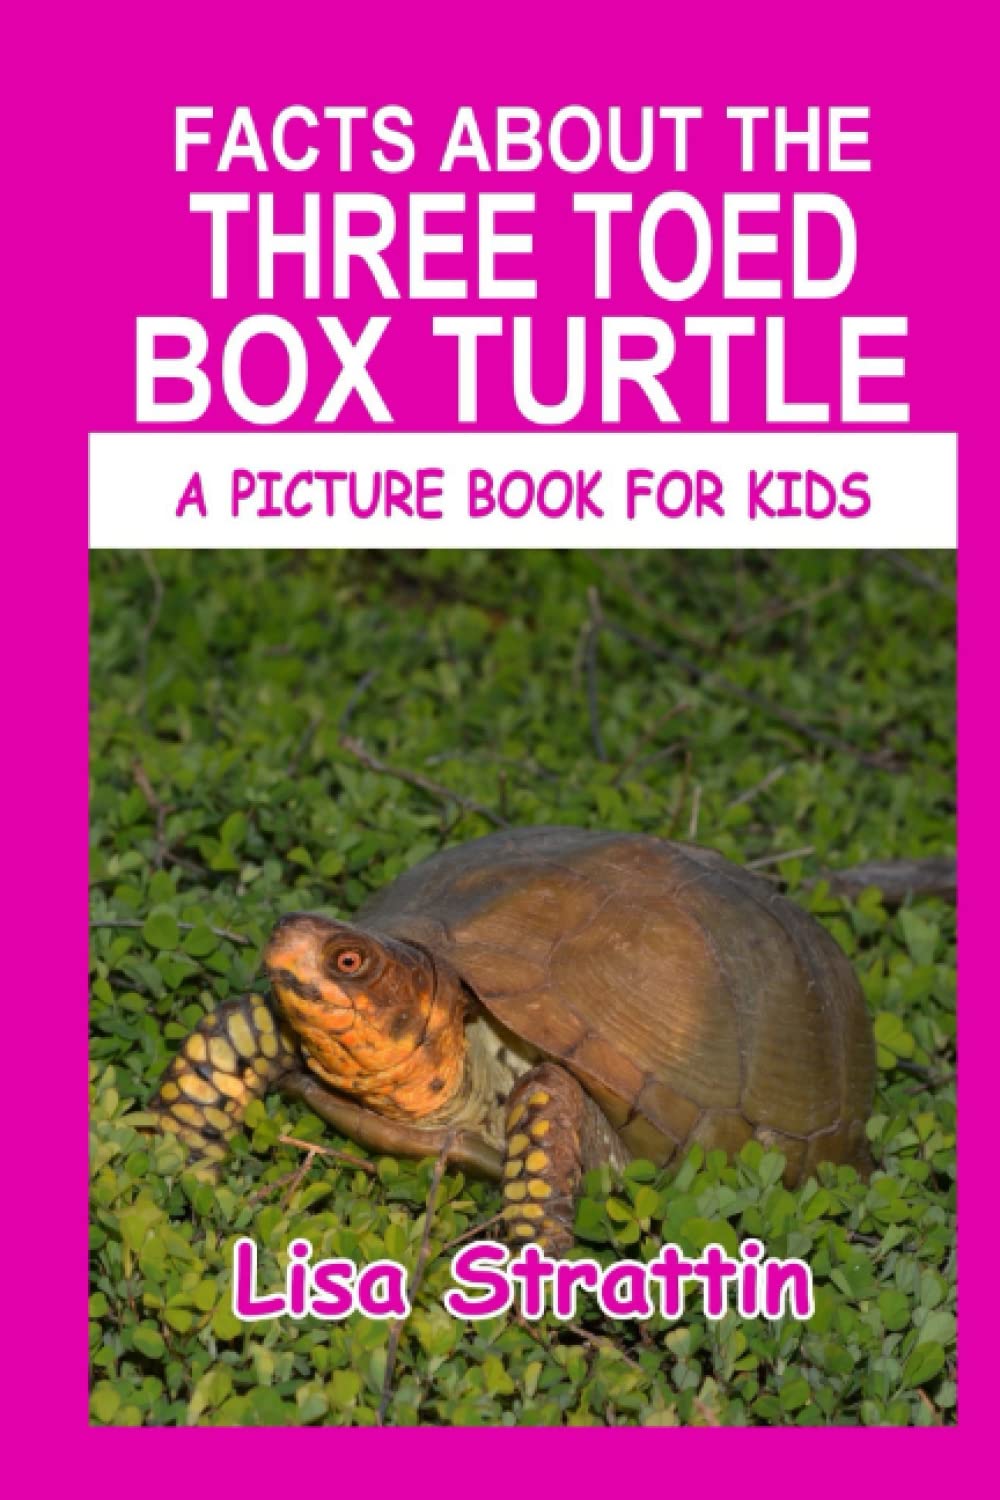 Facts About the Three Toed Box Turtle (A Picture Book For Kids)